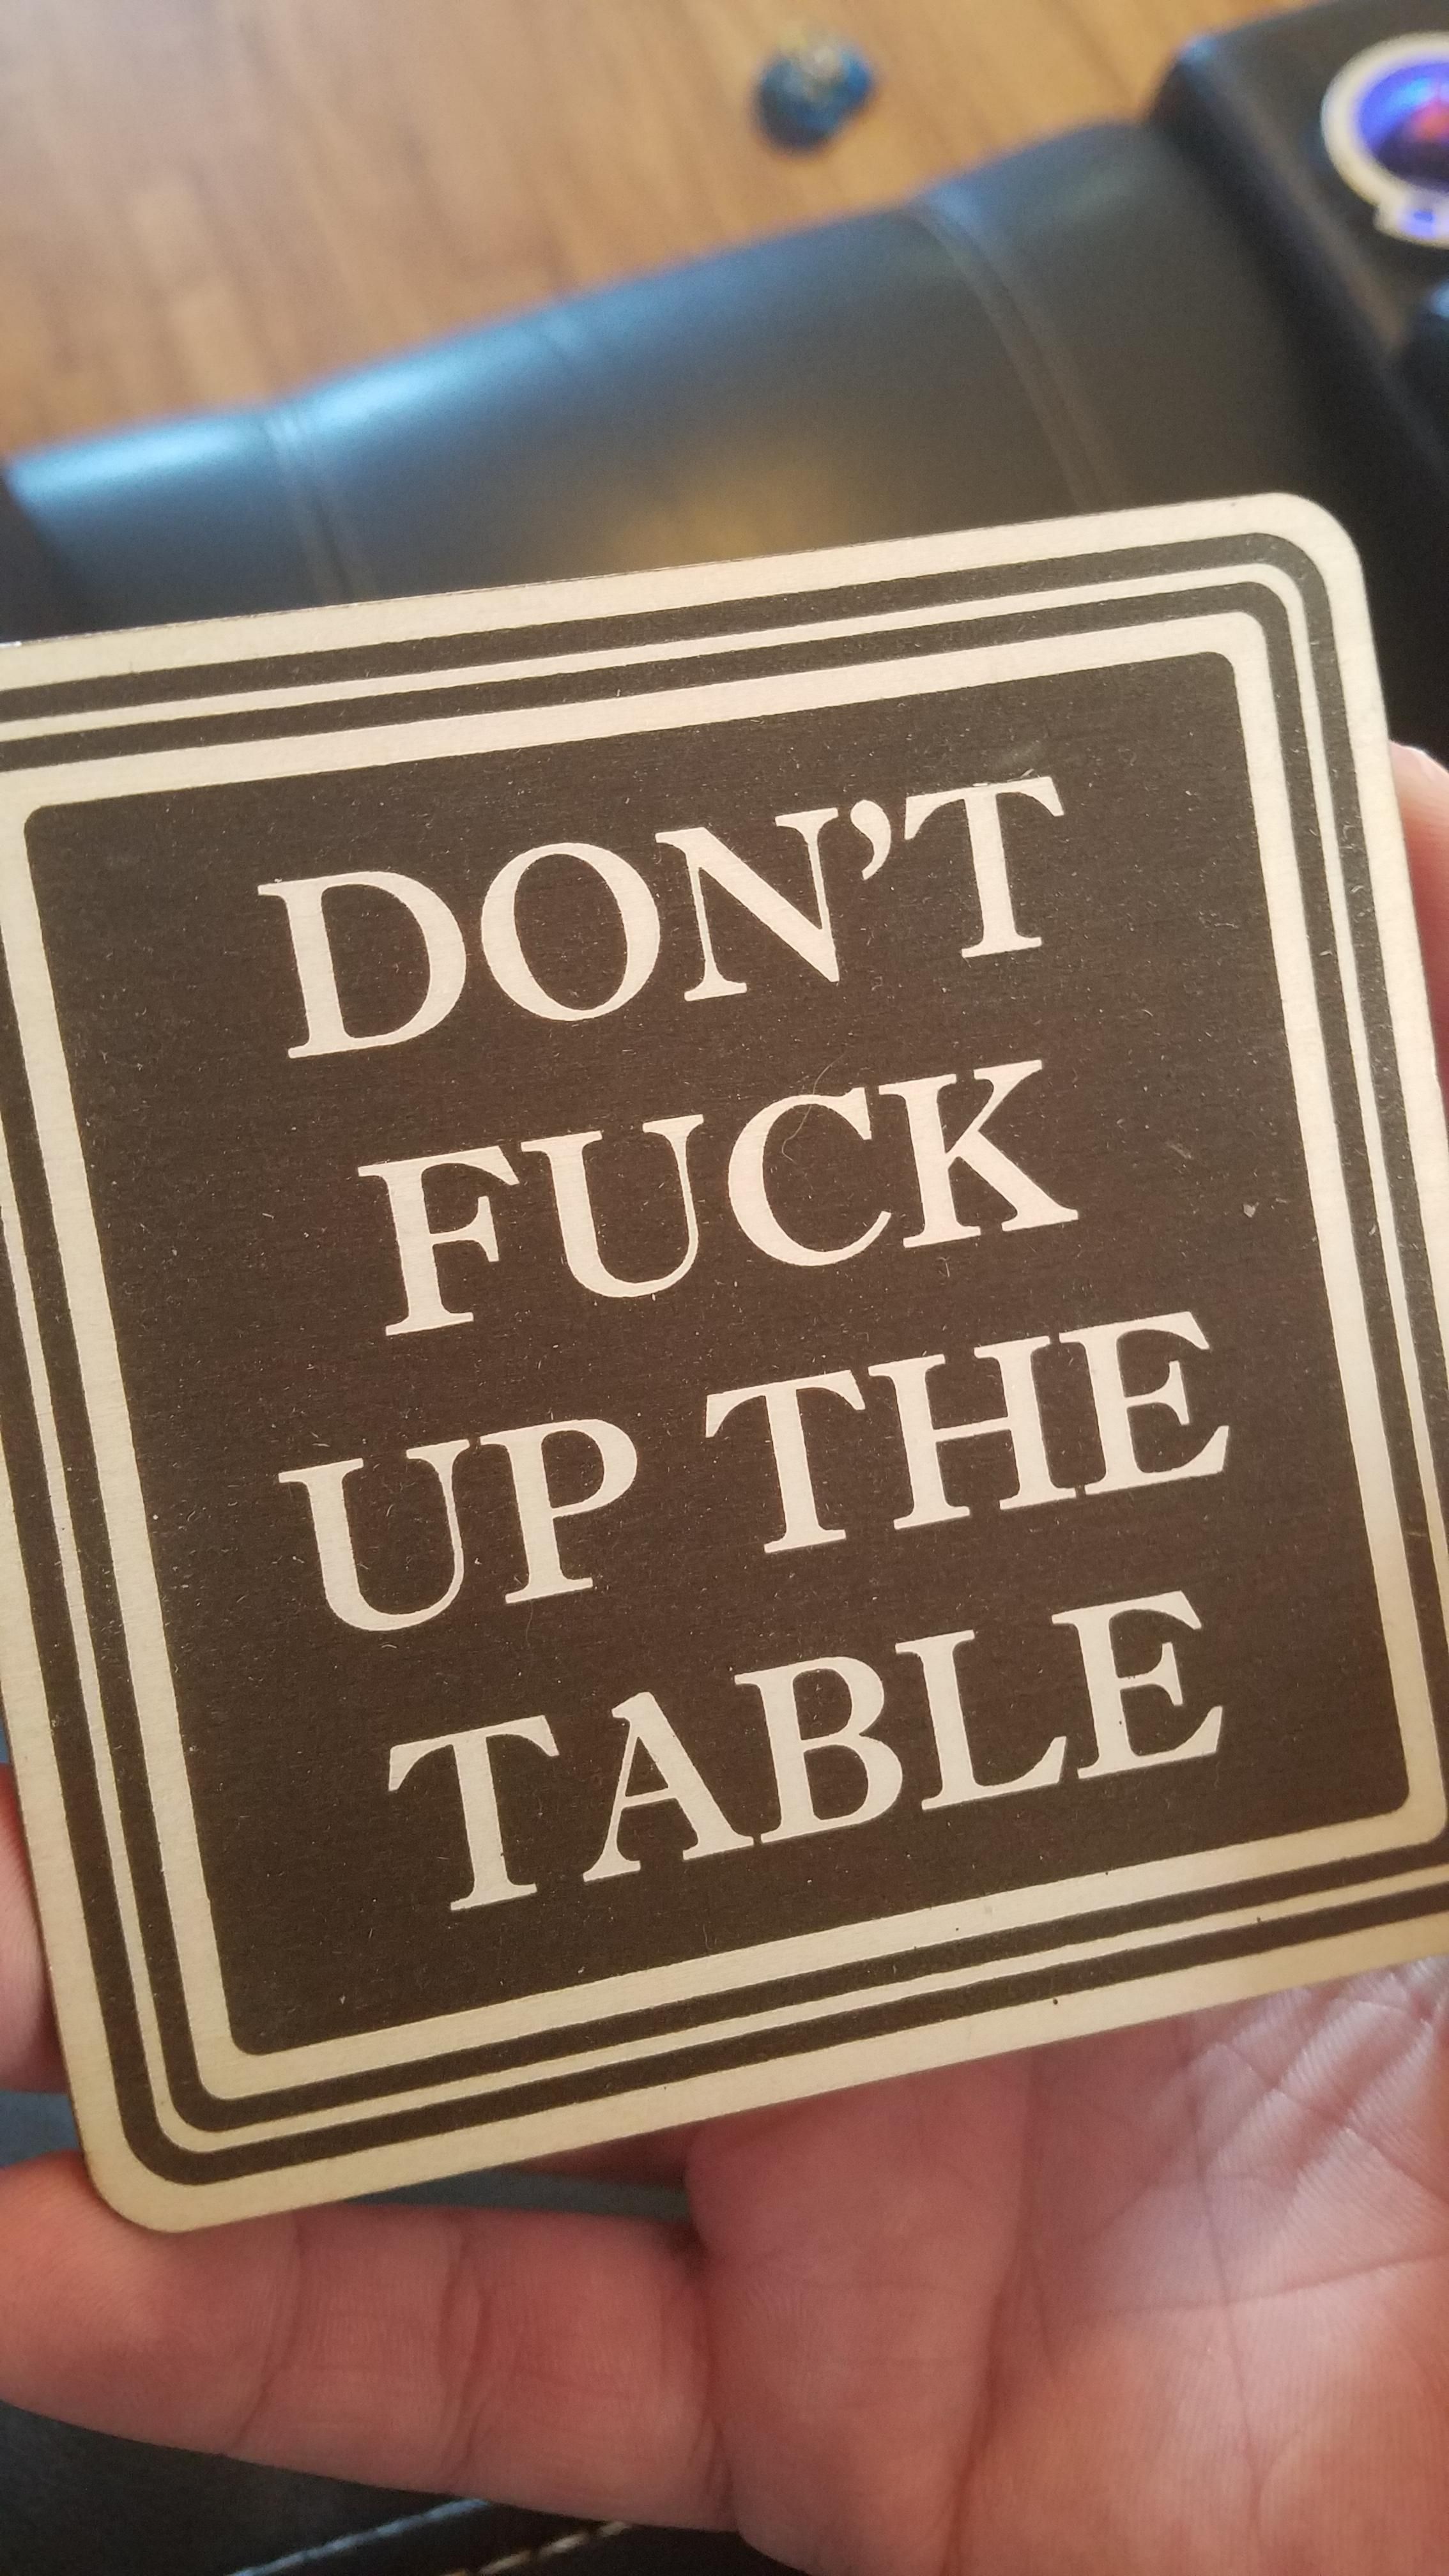 My wife just bought these coasters.